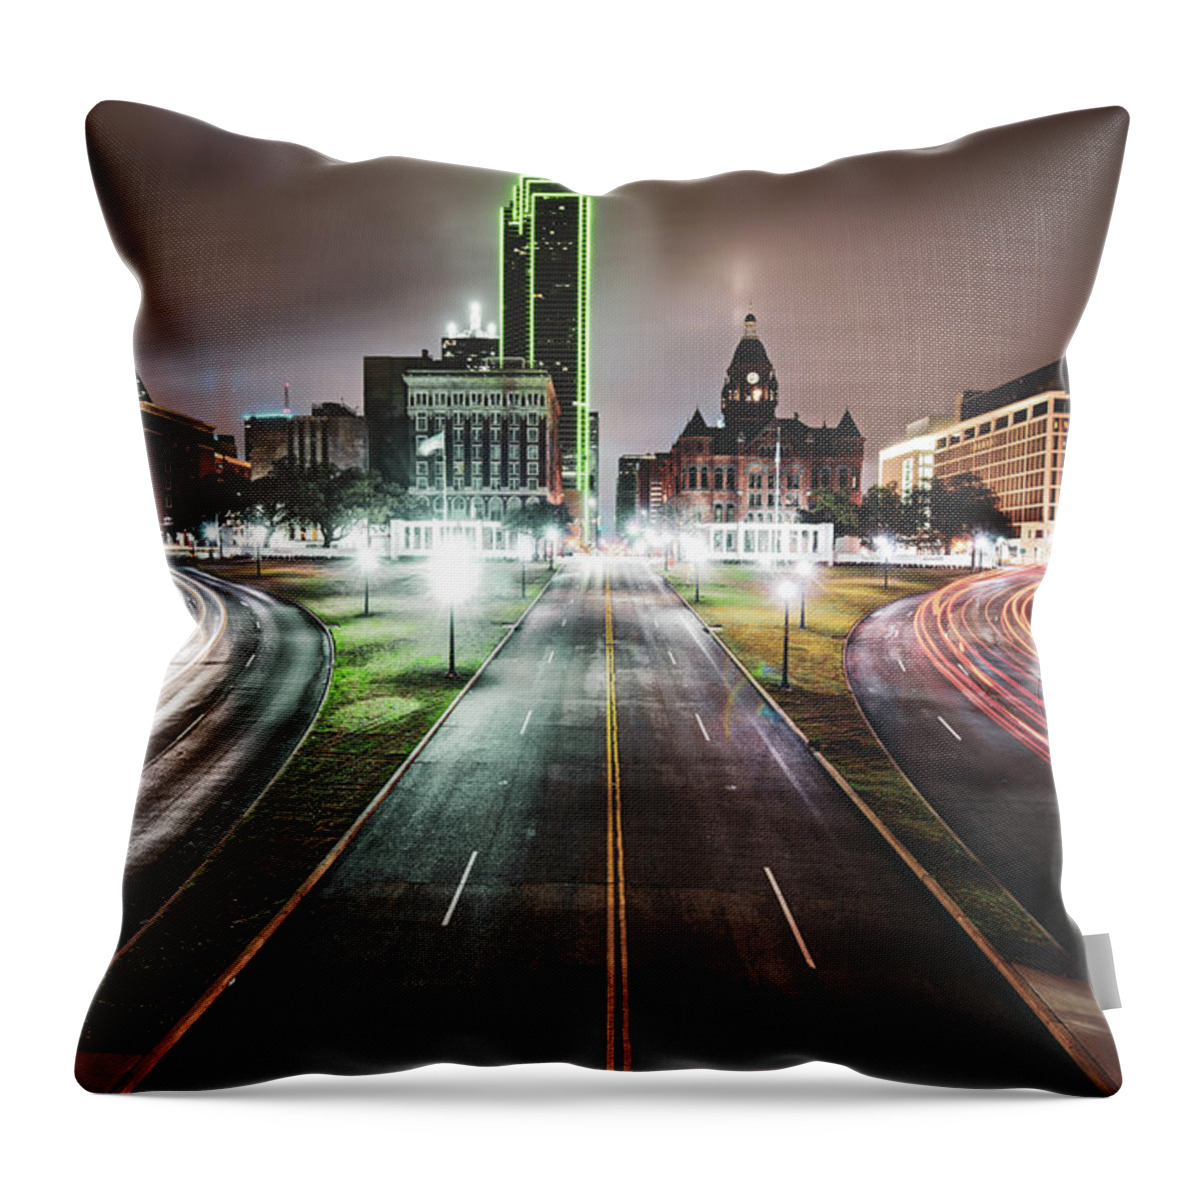 America Throw Pillow featuring the photograph Dealey Plaza Skyline - Dallas Texas by Gregory Ballos